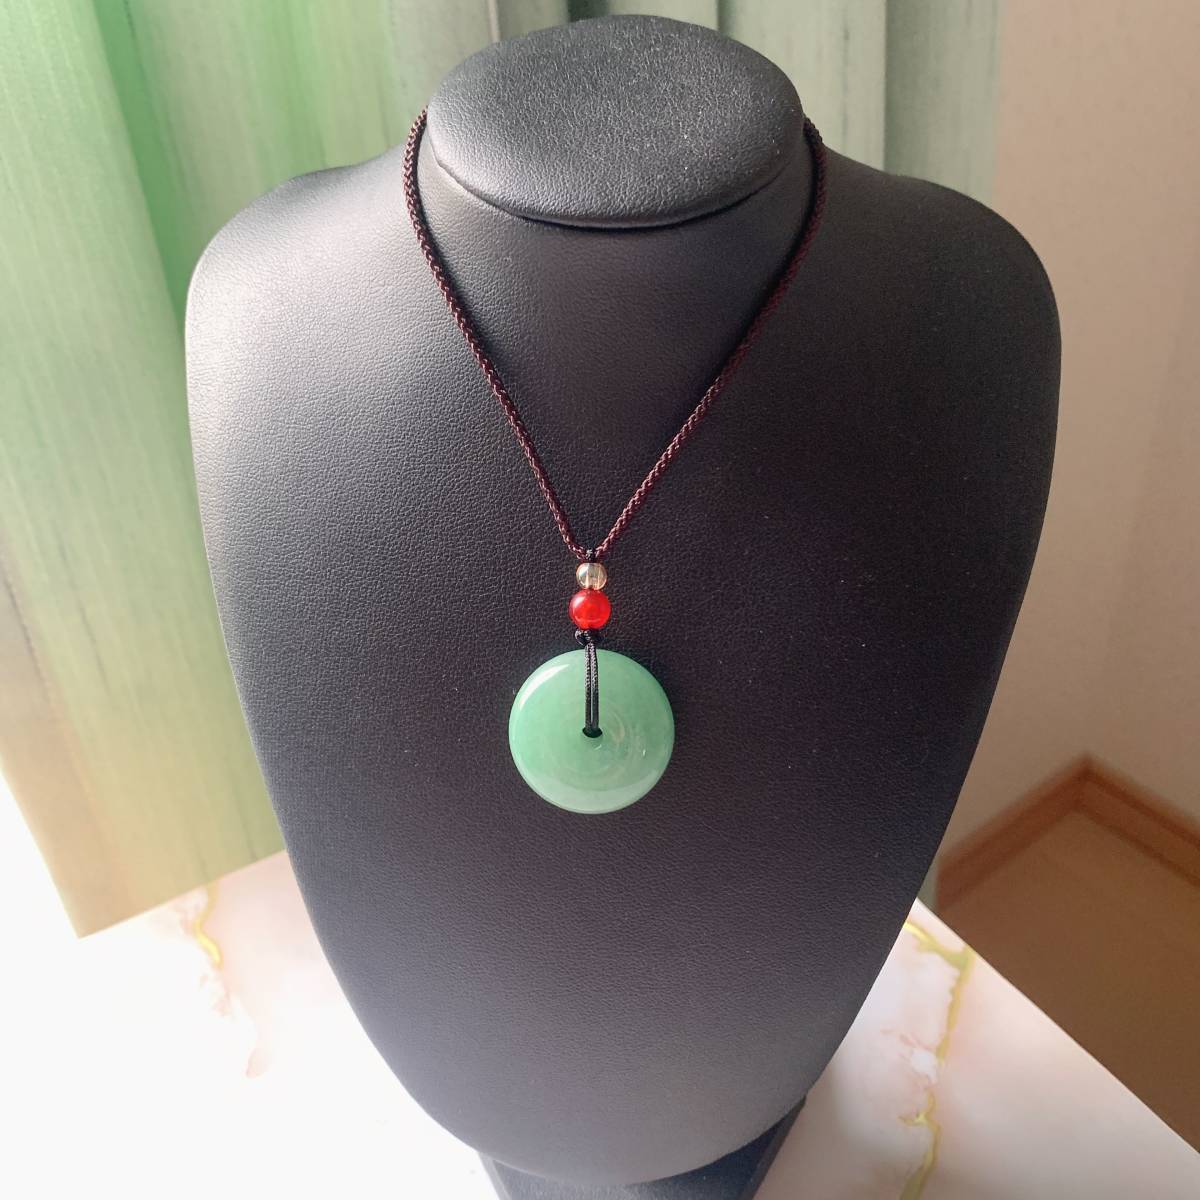 * higashi . sphere * natural stone * necklace pendant * doughnuts type * flat cheap .* amulet *..* jade * wrapping sack attaching * in present .23PR9411